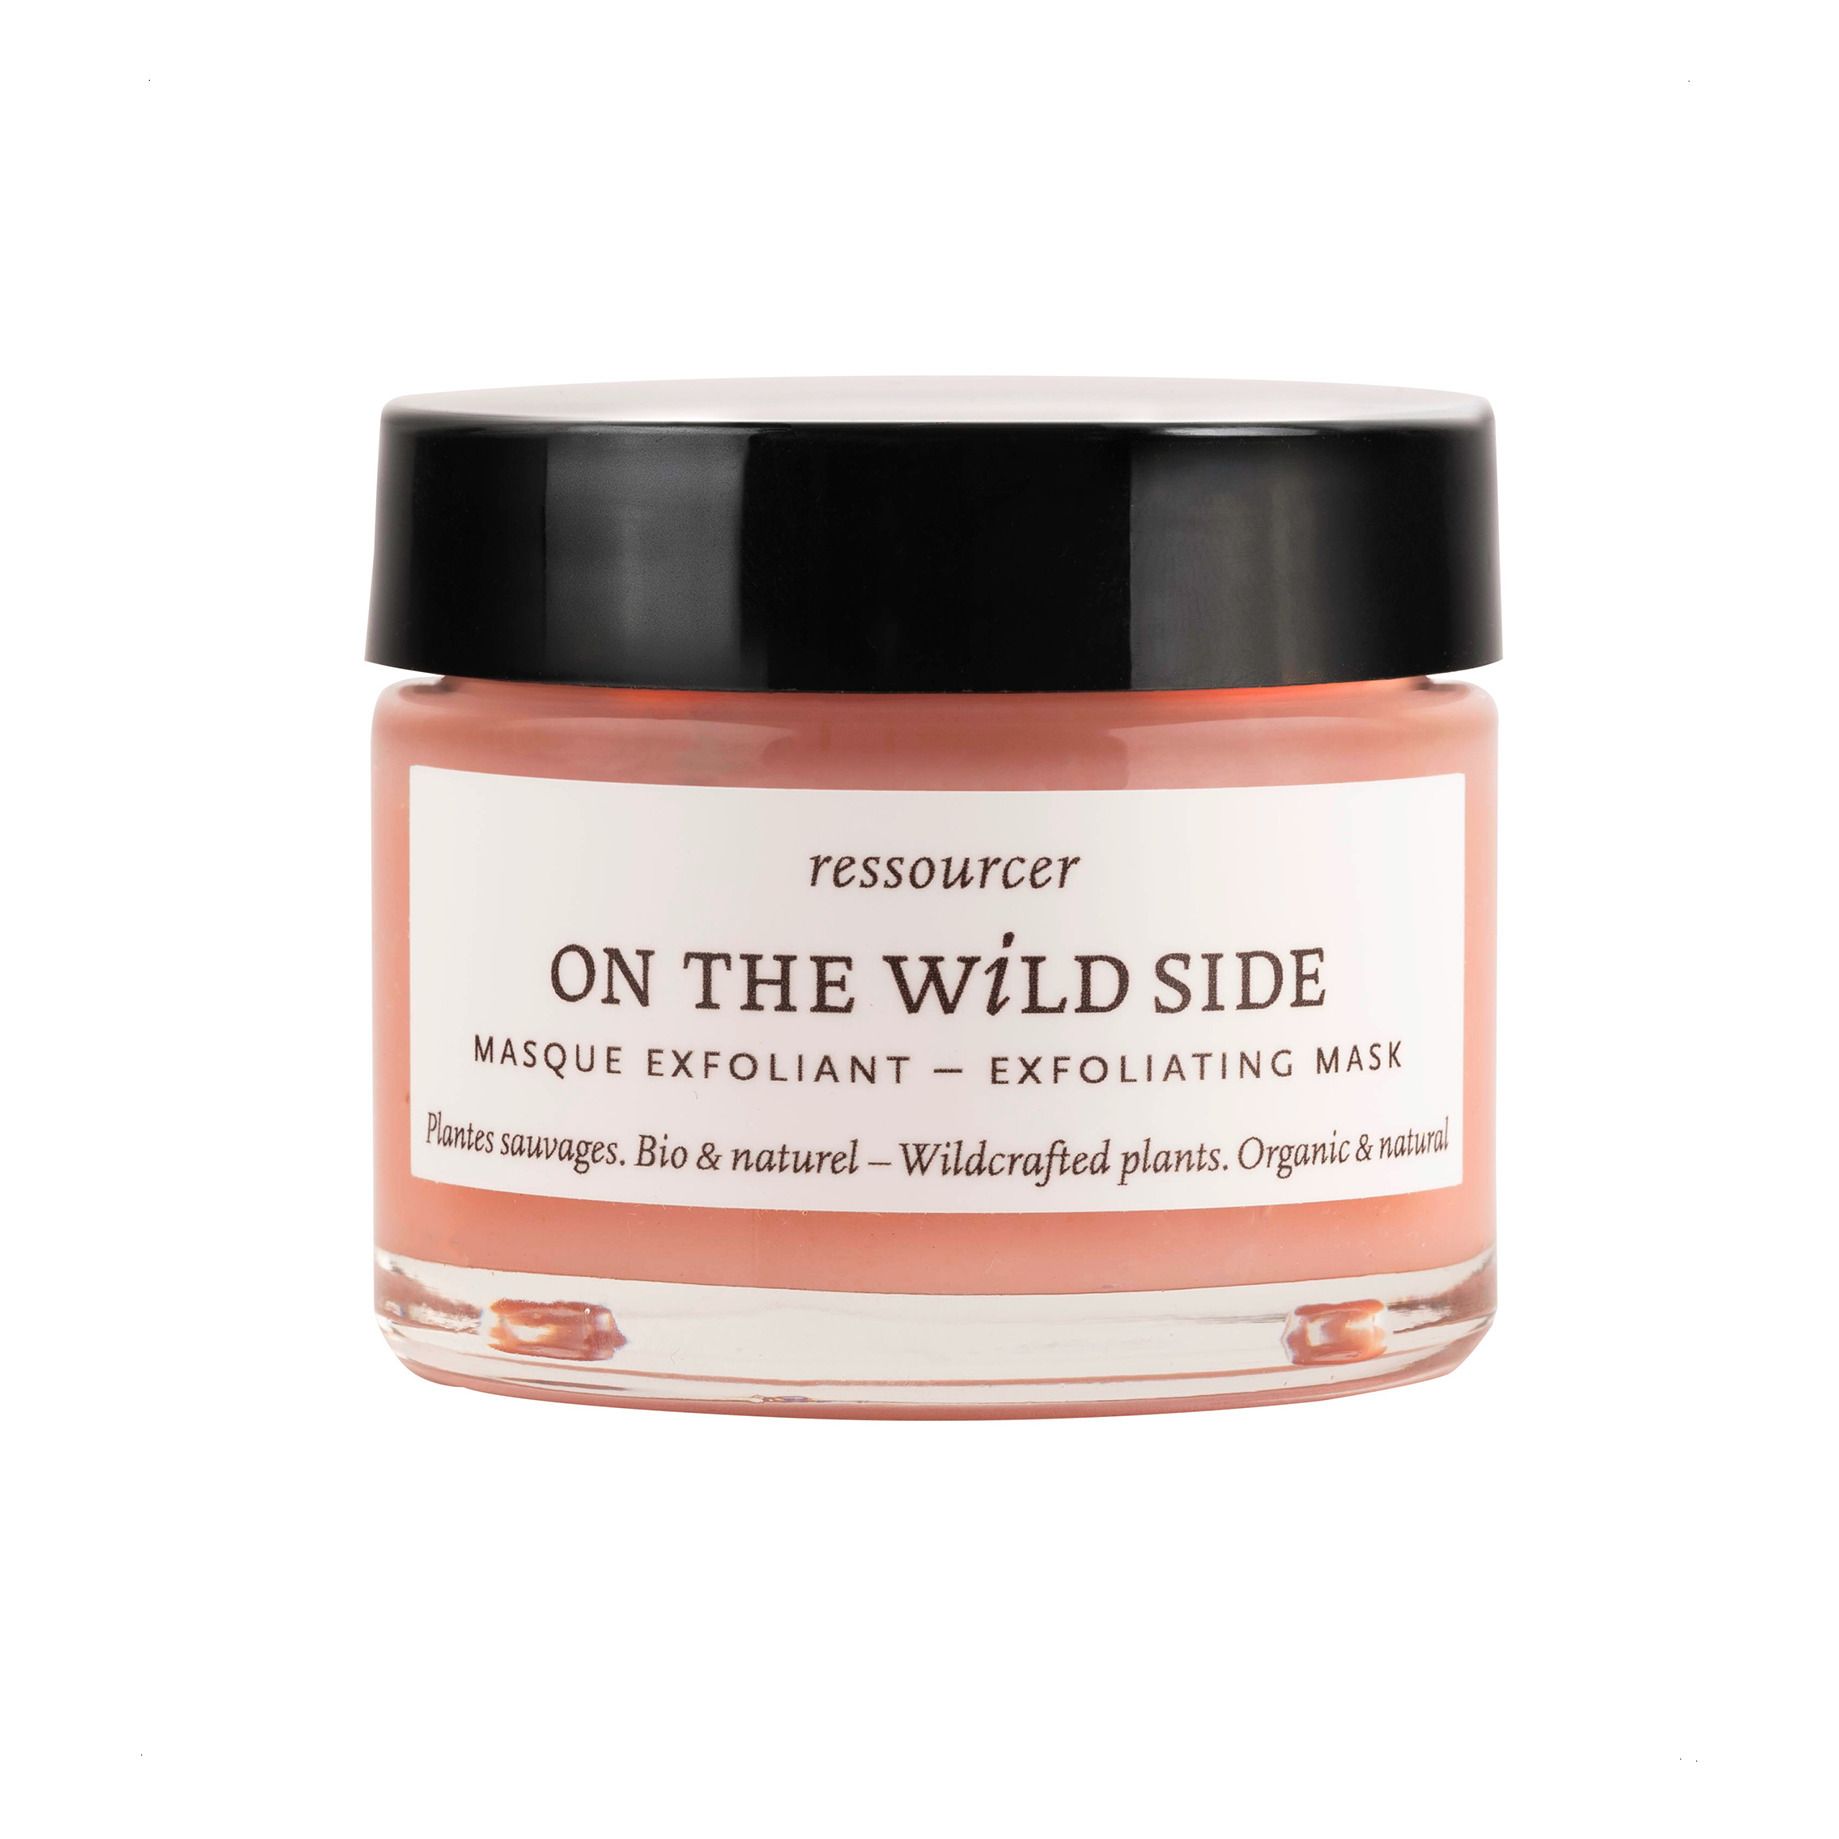 On The Wild Side - Masque exfoliant - 50 ml - Transparent